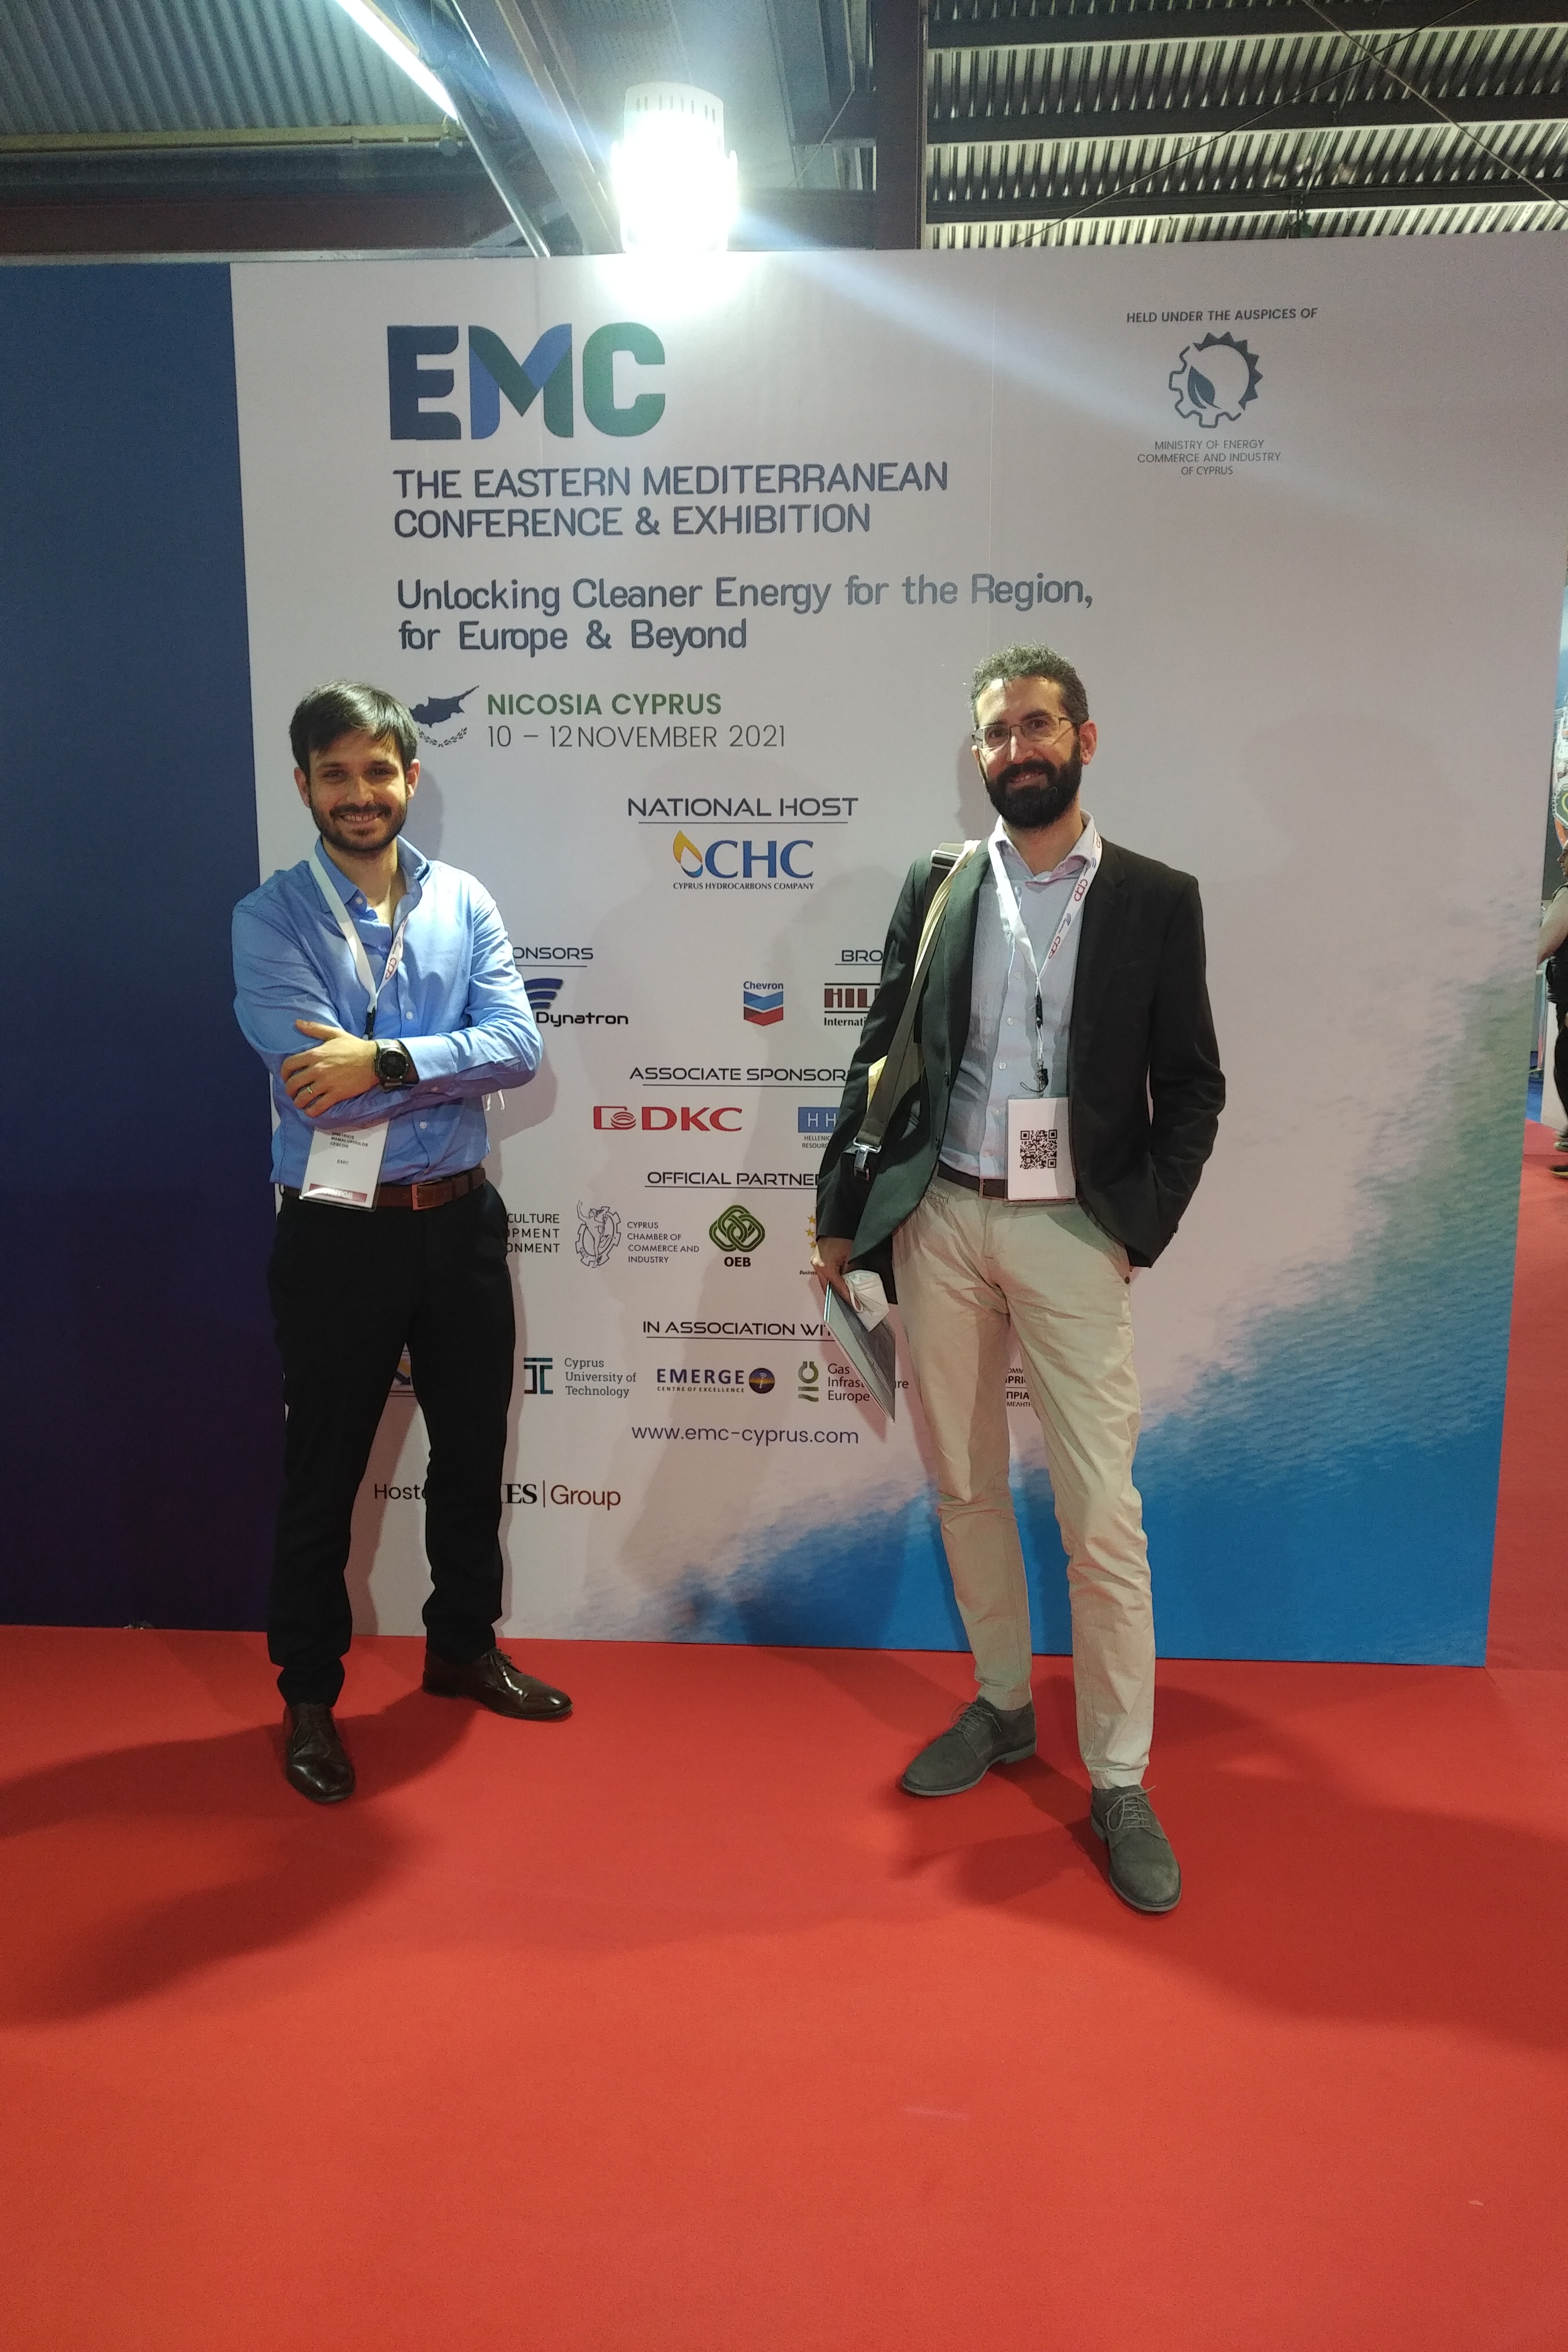 DM and PMM at EMC 2021 Cyprus